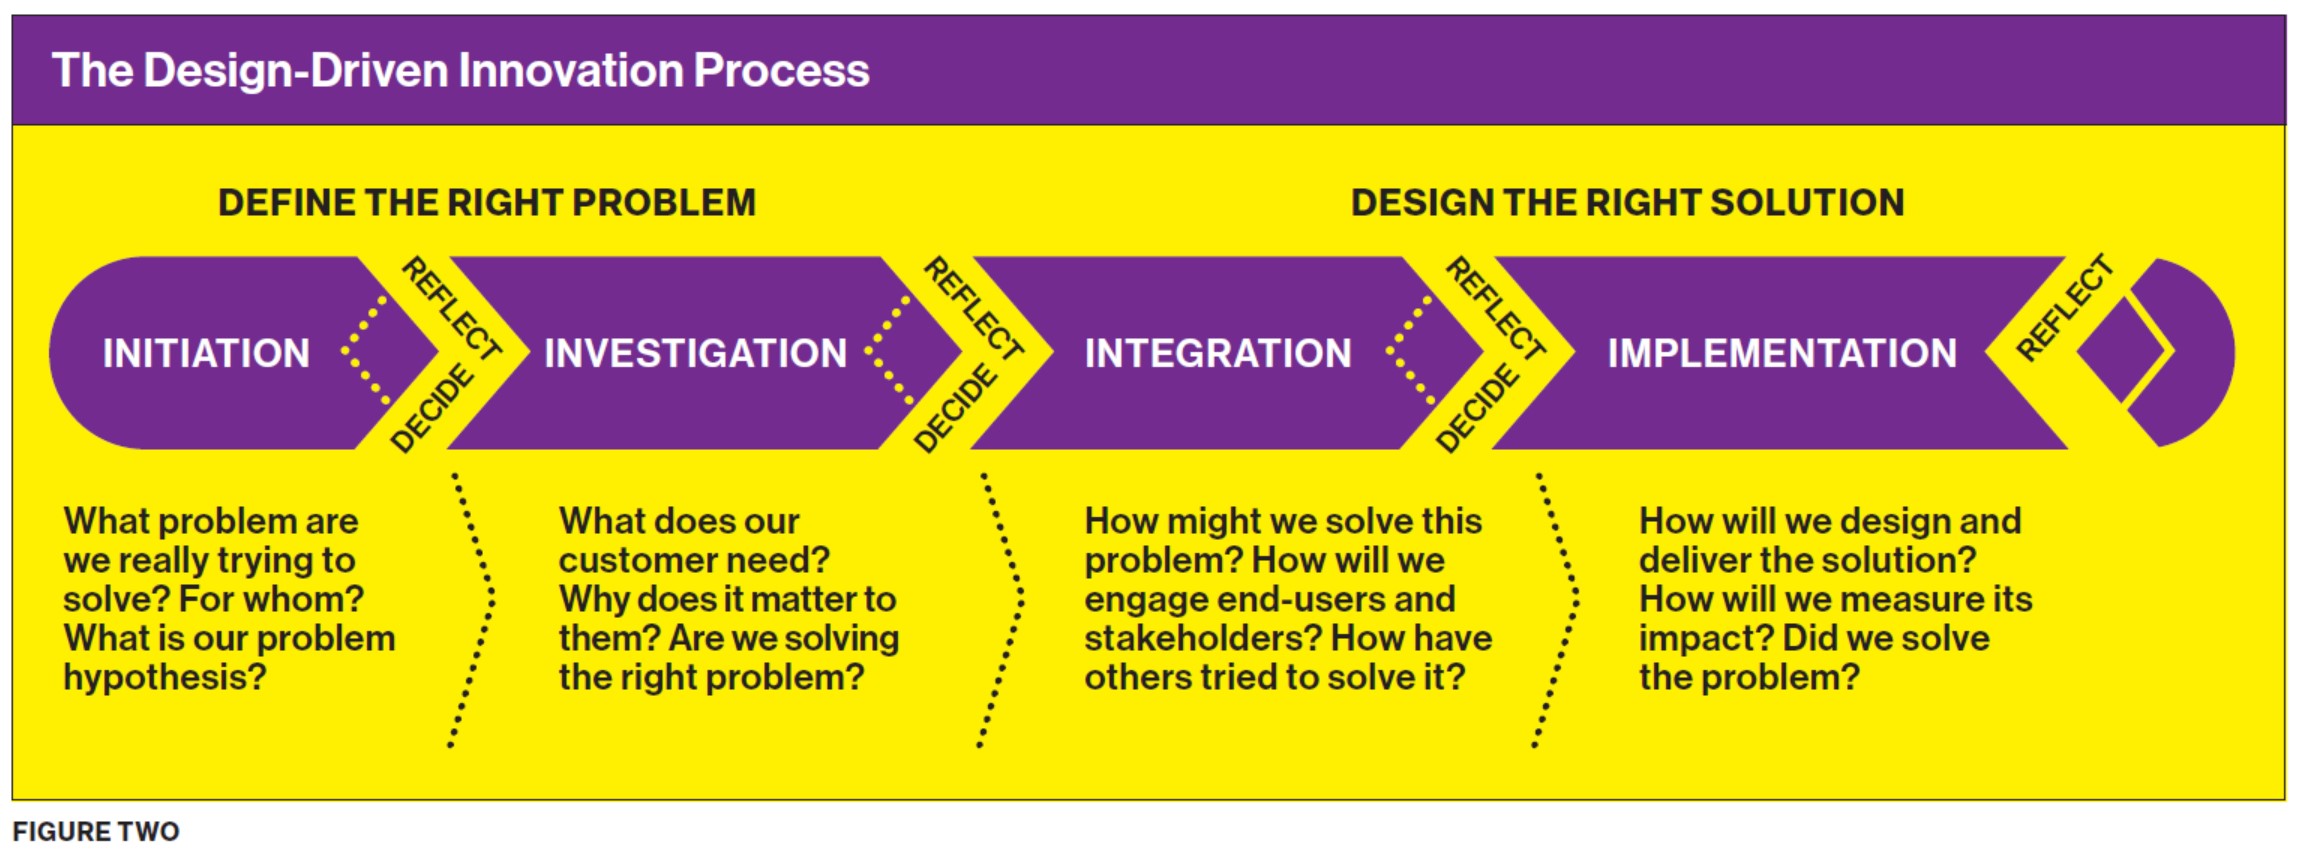 The Design-Driven Innovation Process